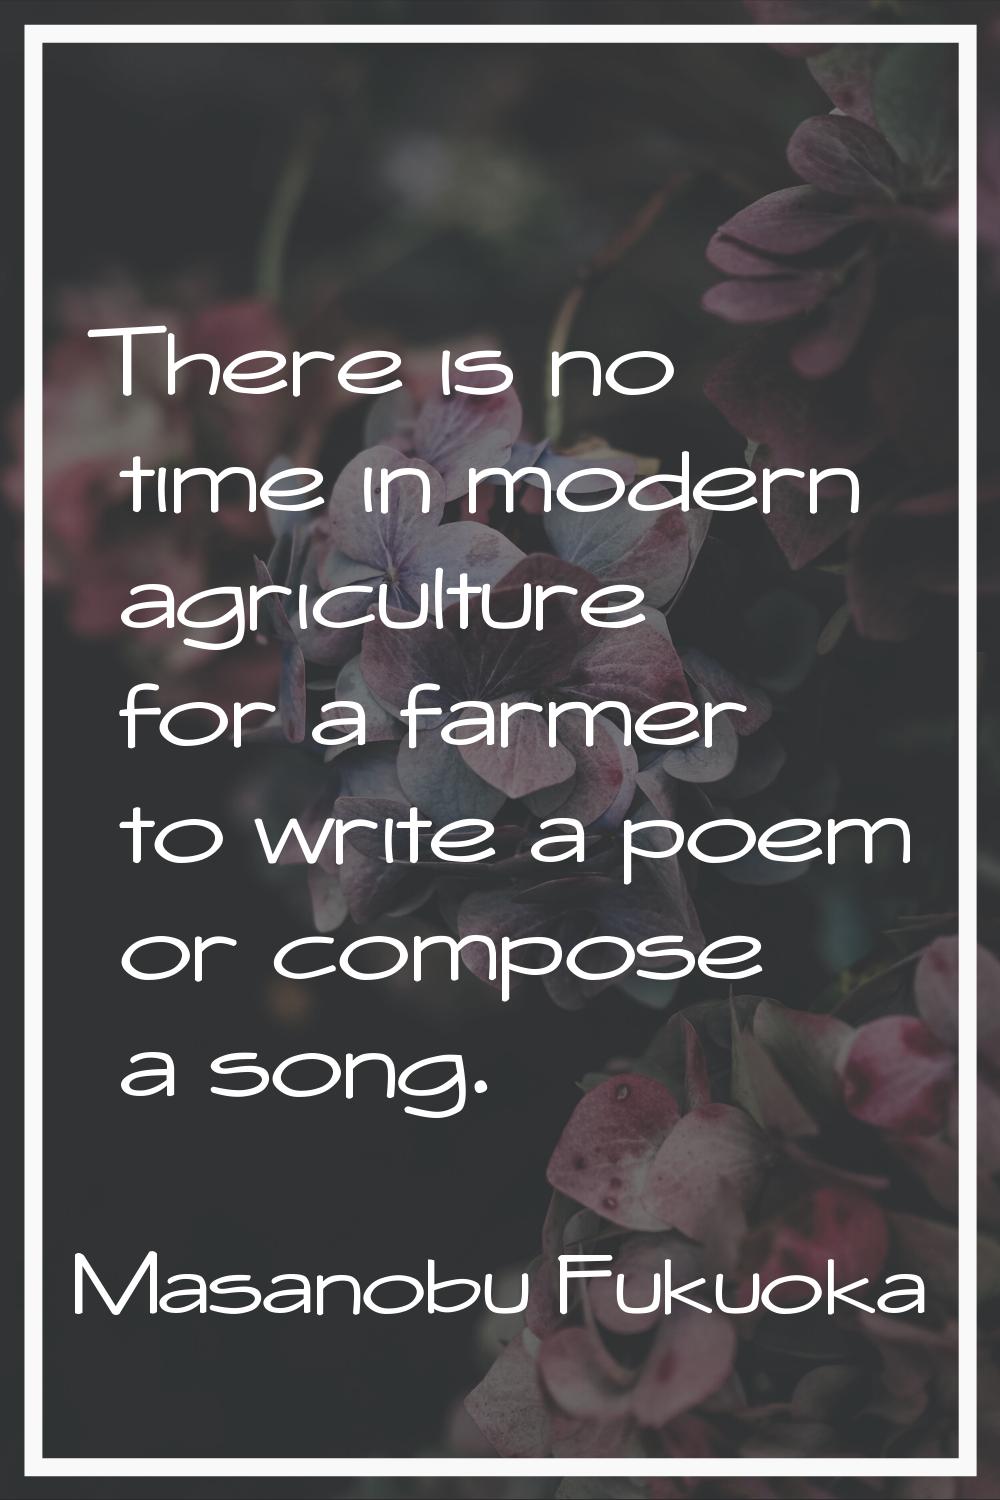 There is no time in modern agriculture for a farmer to write a poem or compose a song.